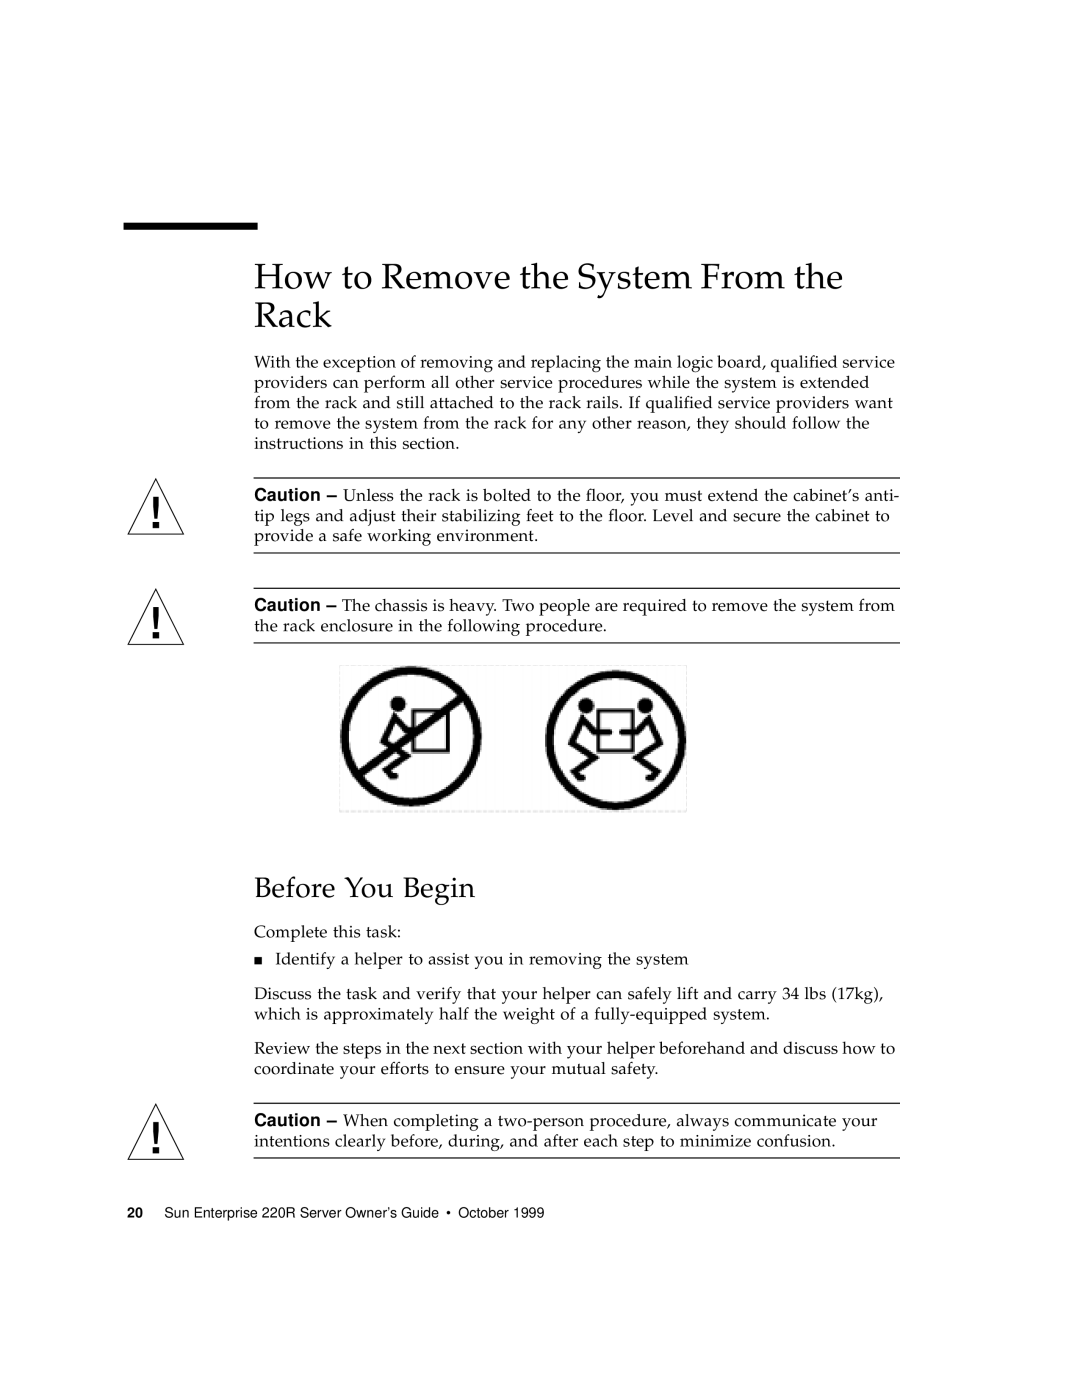 Sun Microsystems 220R manual How to Remove the System From the Rack, Before You Begin 